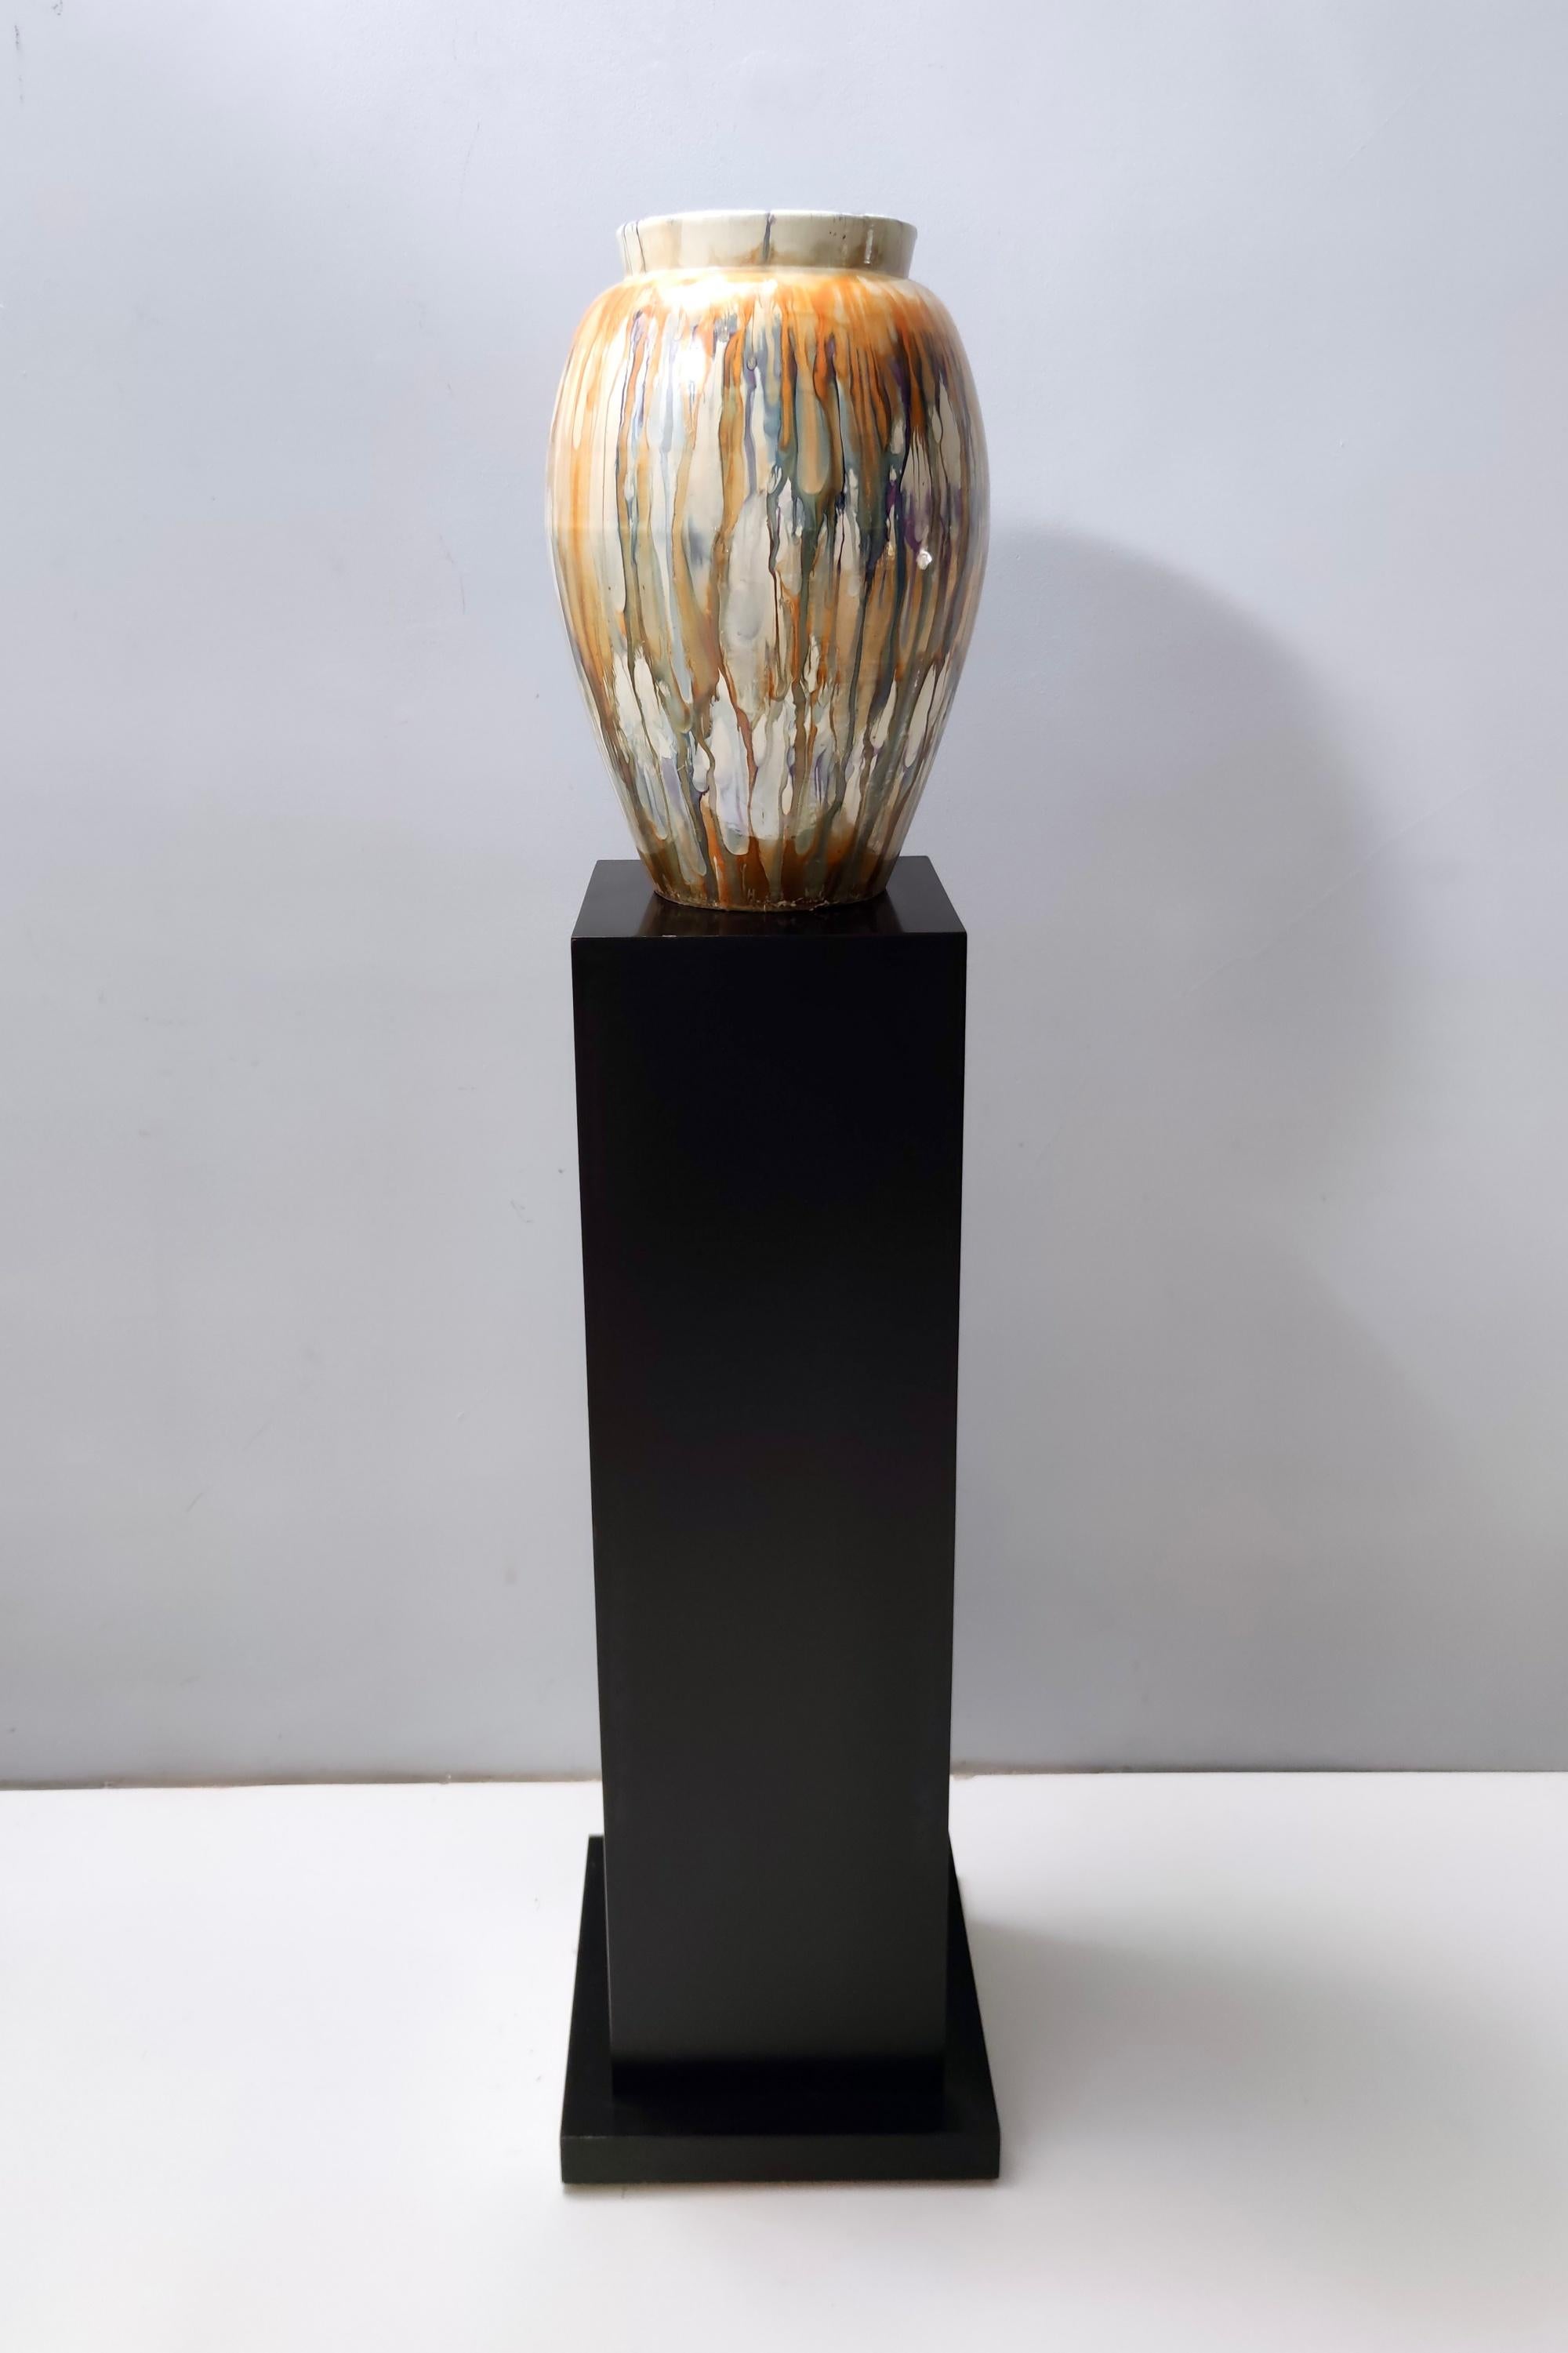 Made in Italy, 1940s - 1950s.
This lacquered earthenware vase is marked by Pasquinucci, Le ceramiche di Pisa. 
This is a vintage piece, therefore it might show slight traces of use, but it can be considered as in excellent original condition and